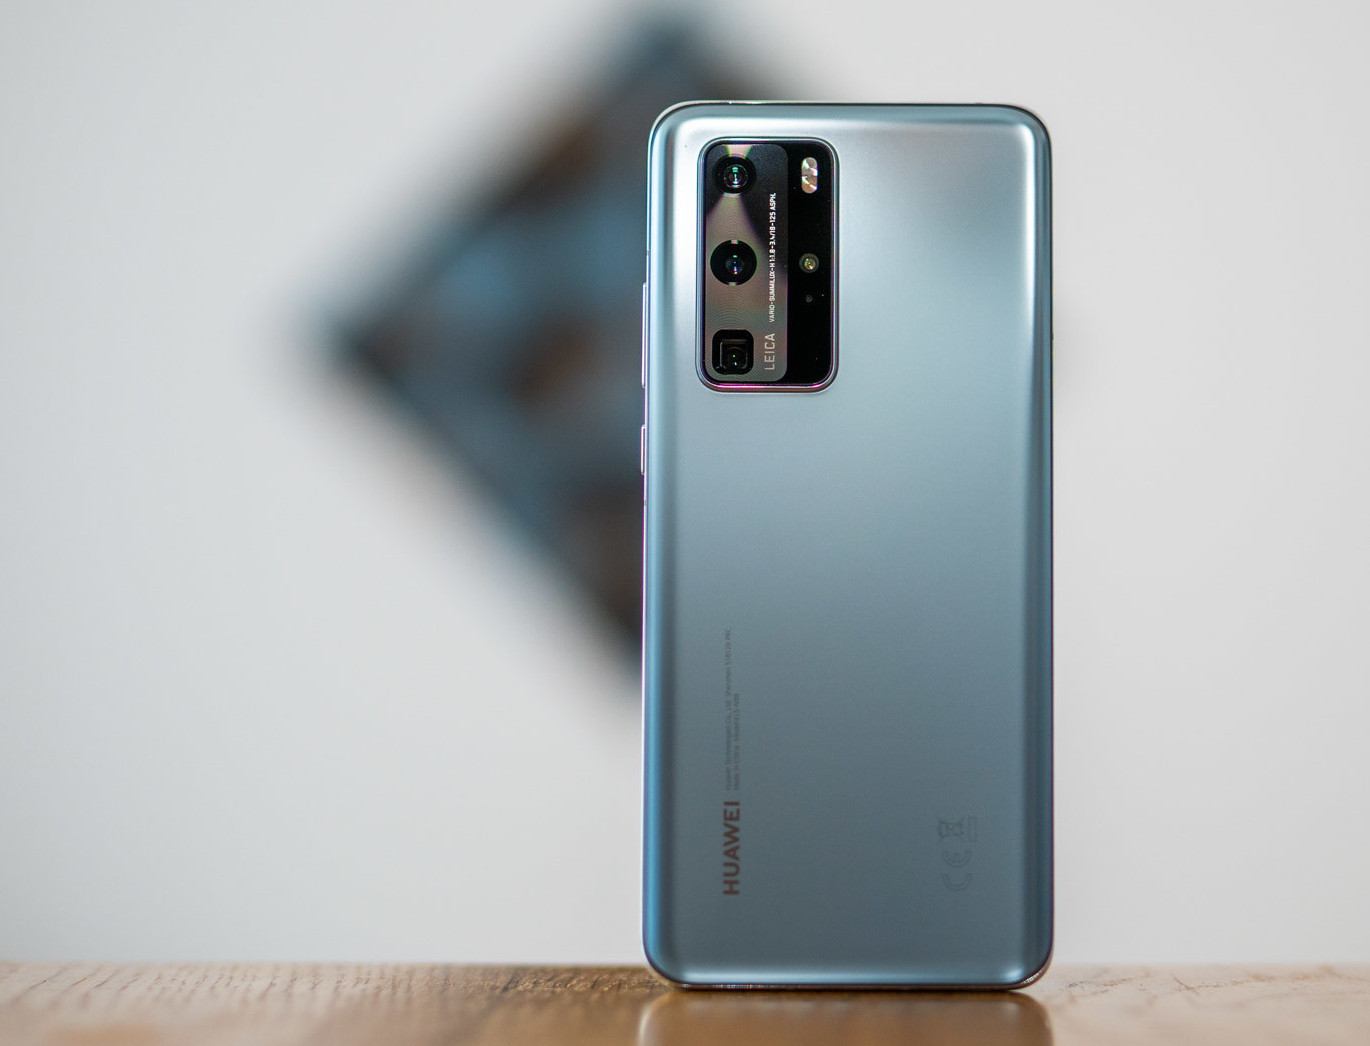 Review of Huawei P40 smartphone with advantages and disadvantages